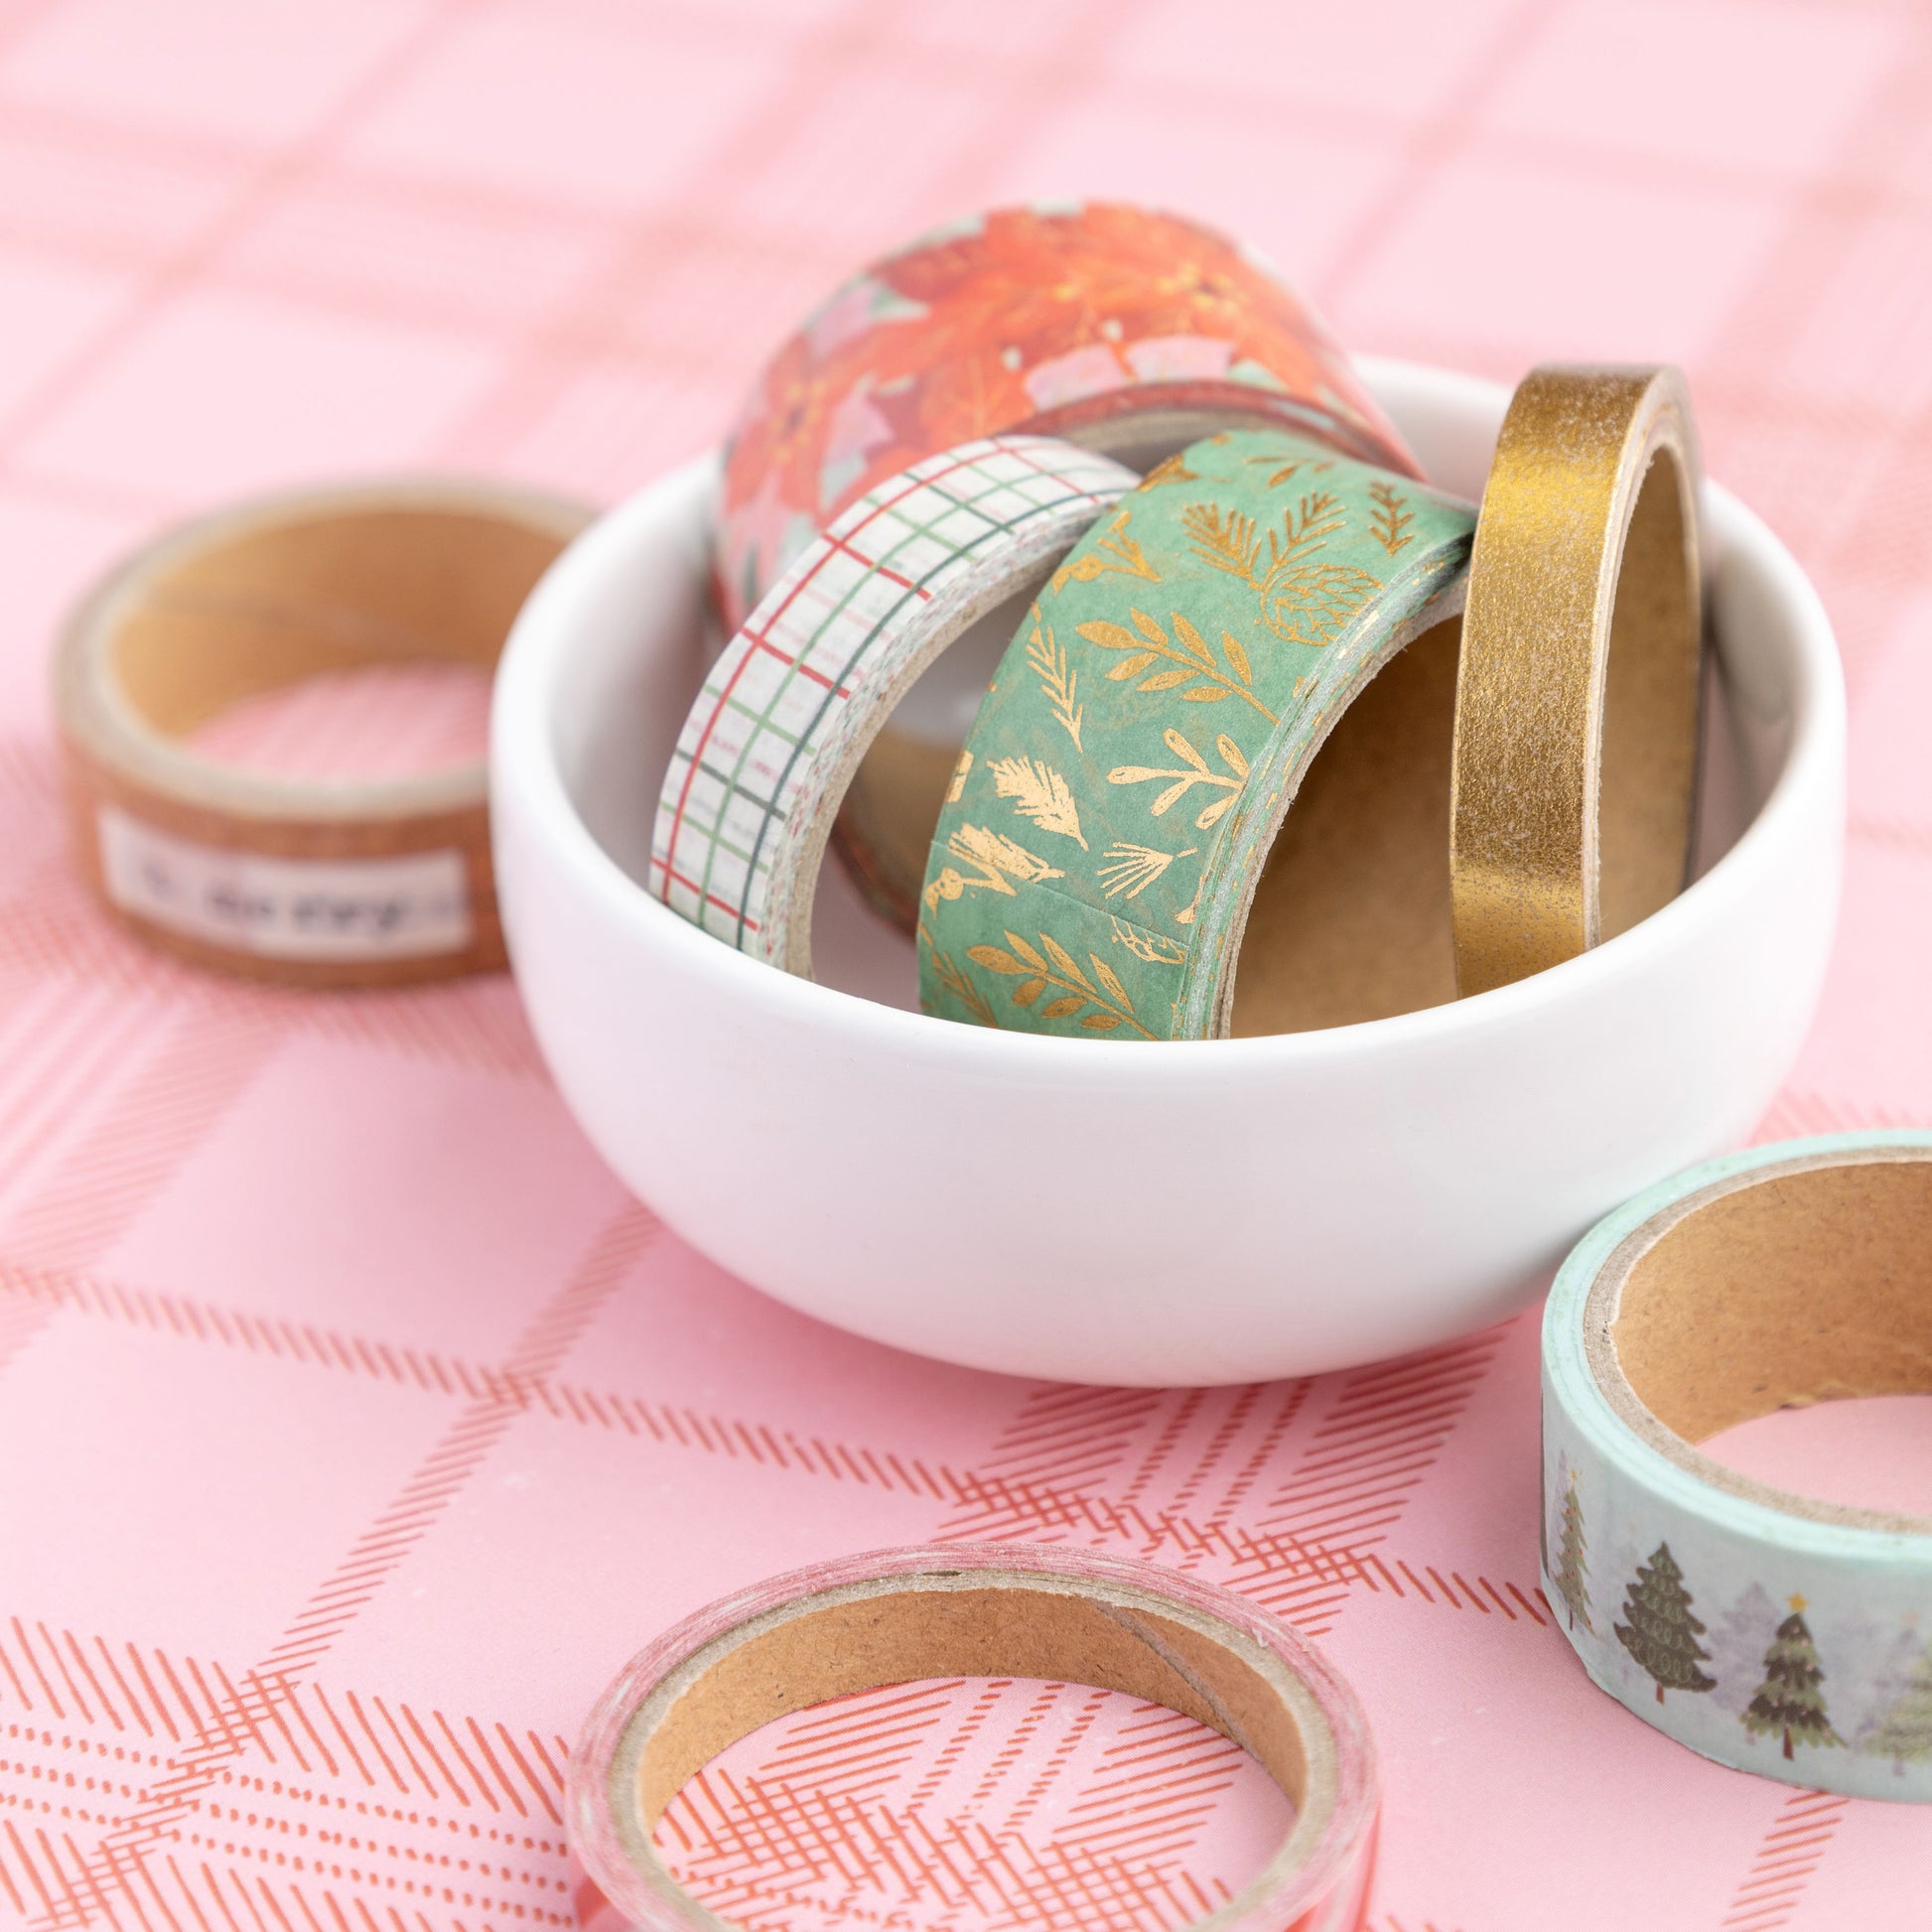  Cratey Winter PET Washi Tapes for Journaling, Scrapbooking &  Crafting. Cut & Use as Christmas Ice Theme Stickers in Your Junk Journals,  Crafts, or Planners : Arts, Crafts & Sewing